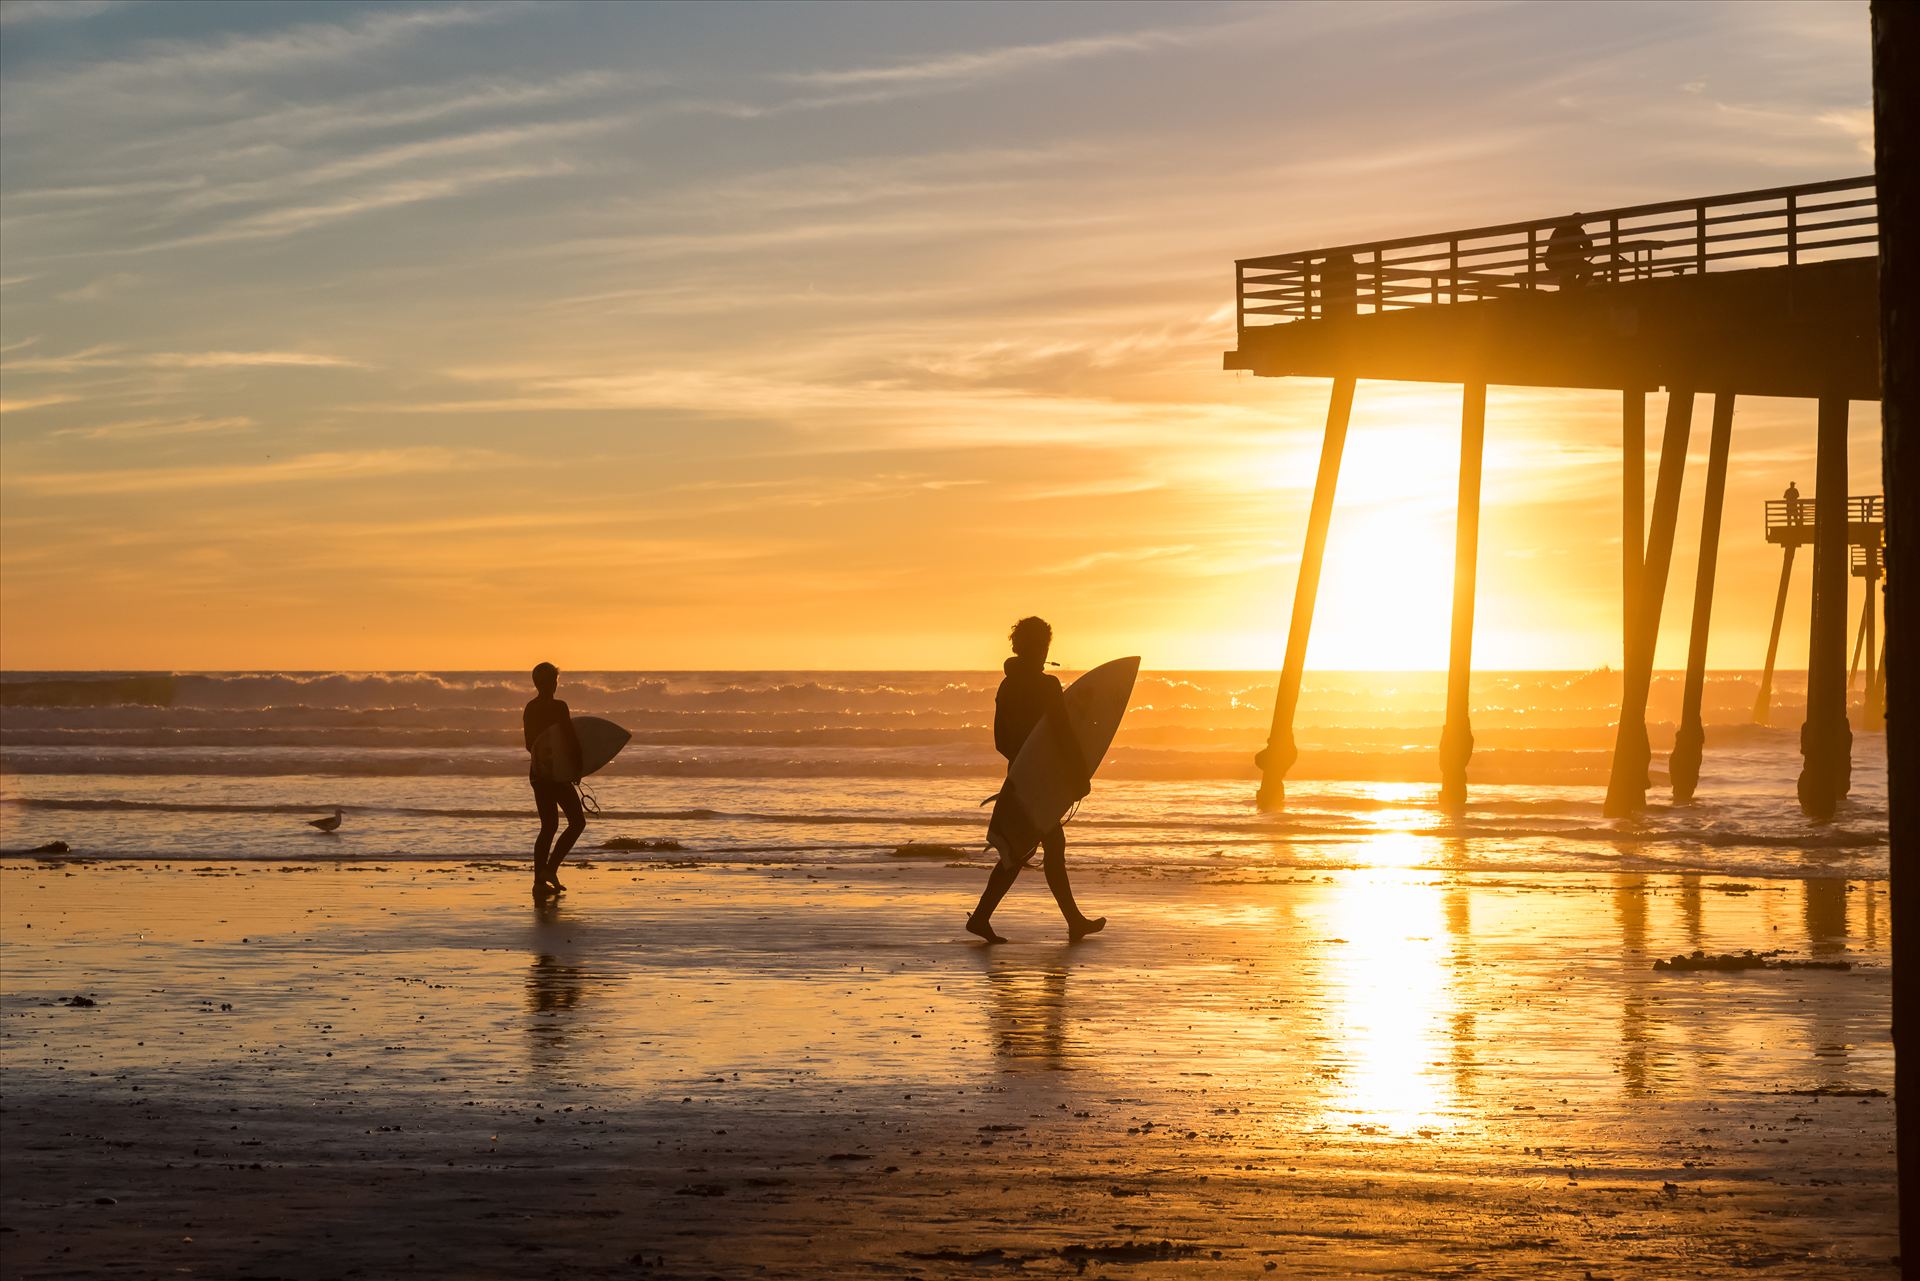 Surfers at Sunset3.jpg  by Sarah Williams